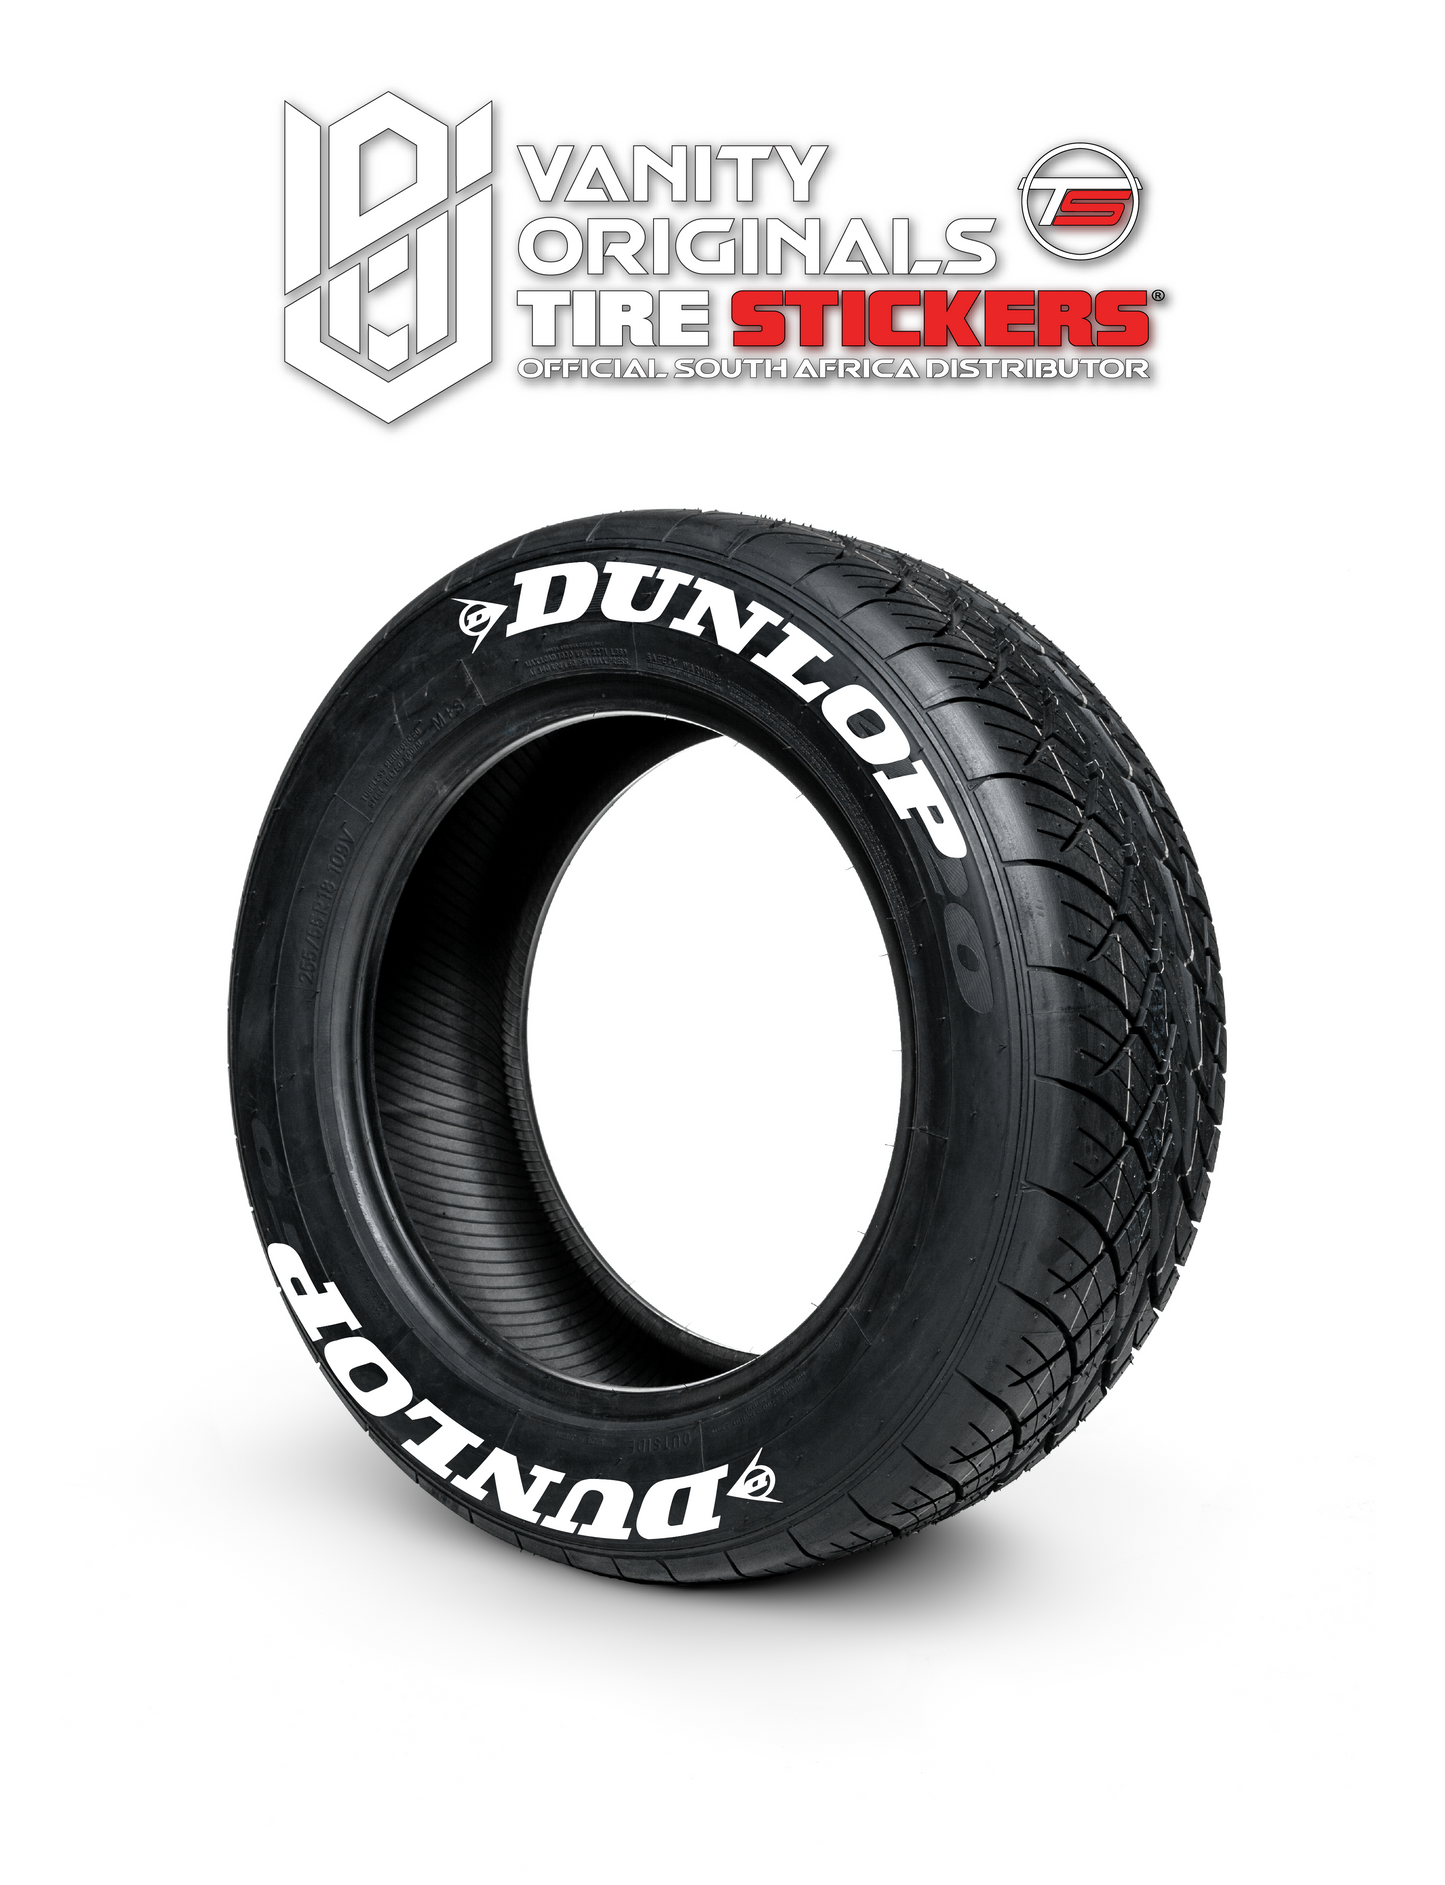 Dunlop ( 8x Rubber Decals, Adhesive & Instructions Included )